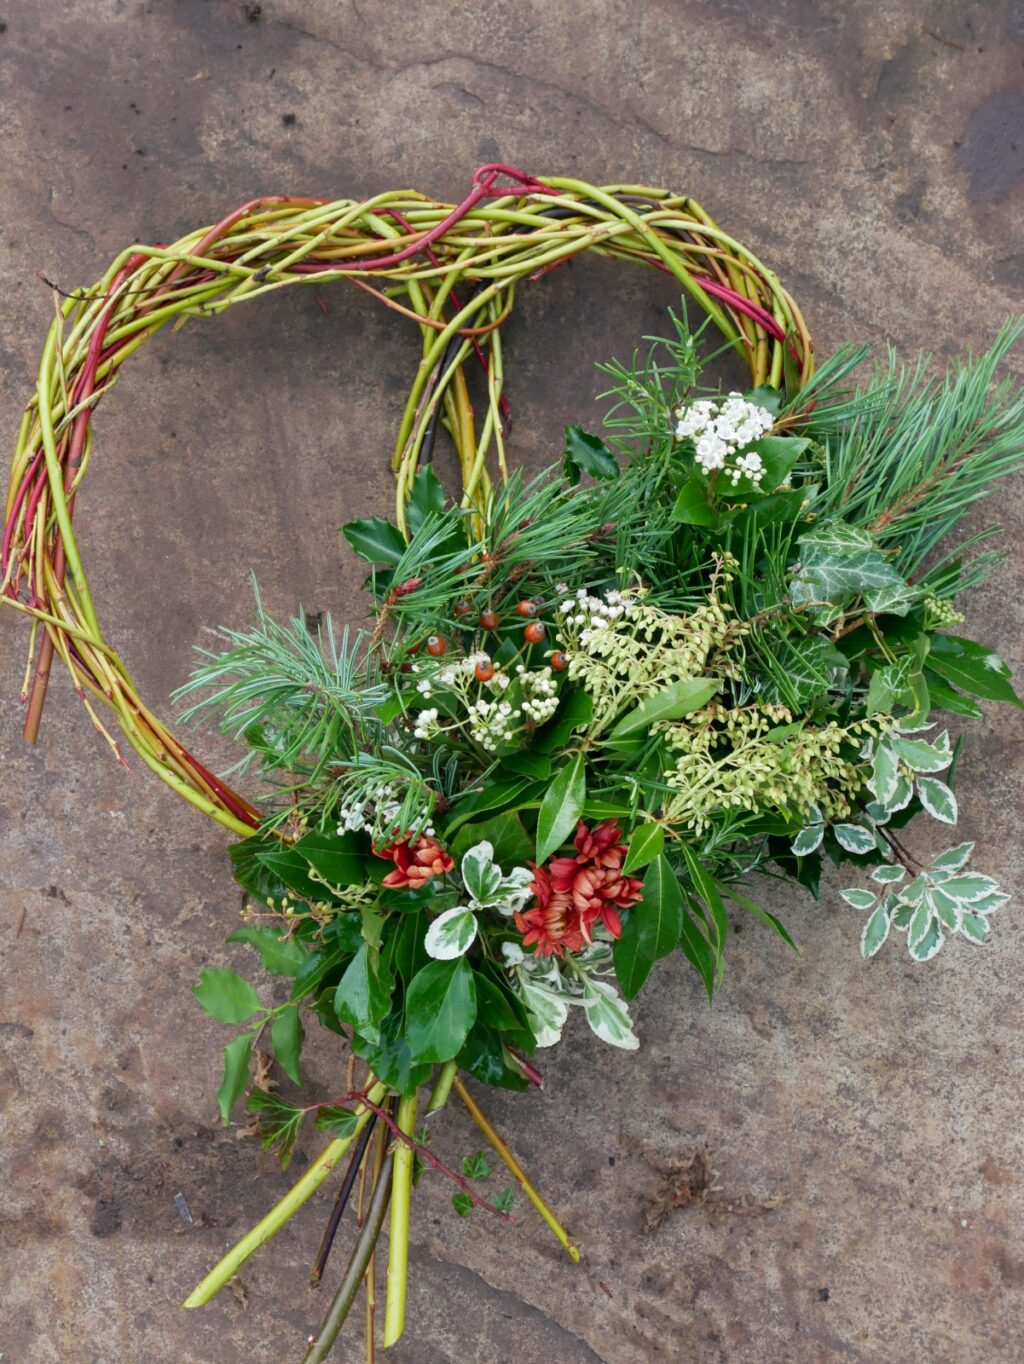 A woven willow heart wreath adorned with evergreen foliage and winter blossom